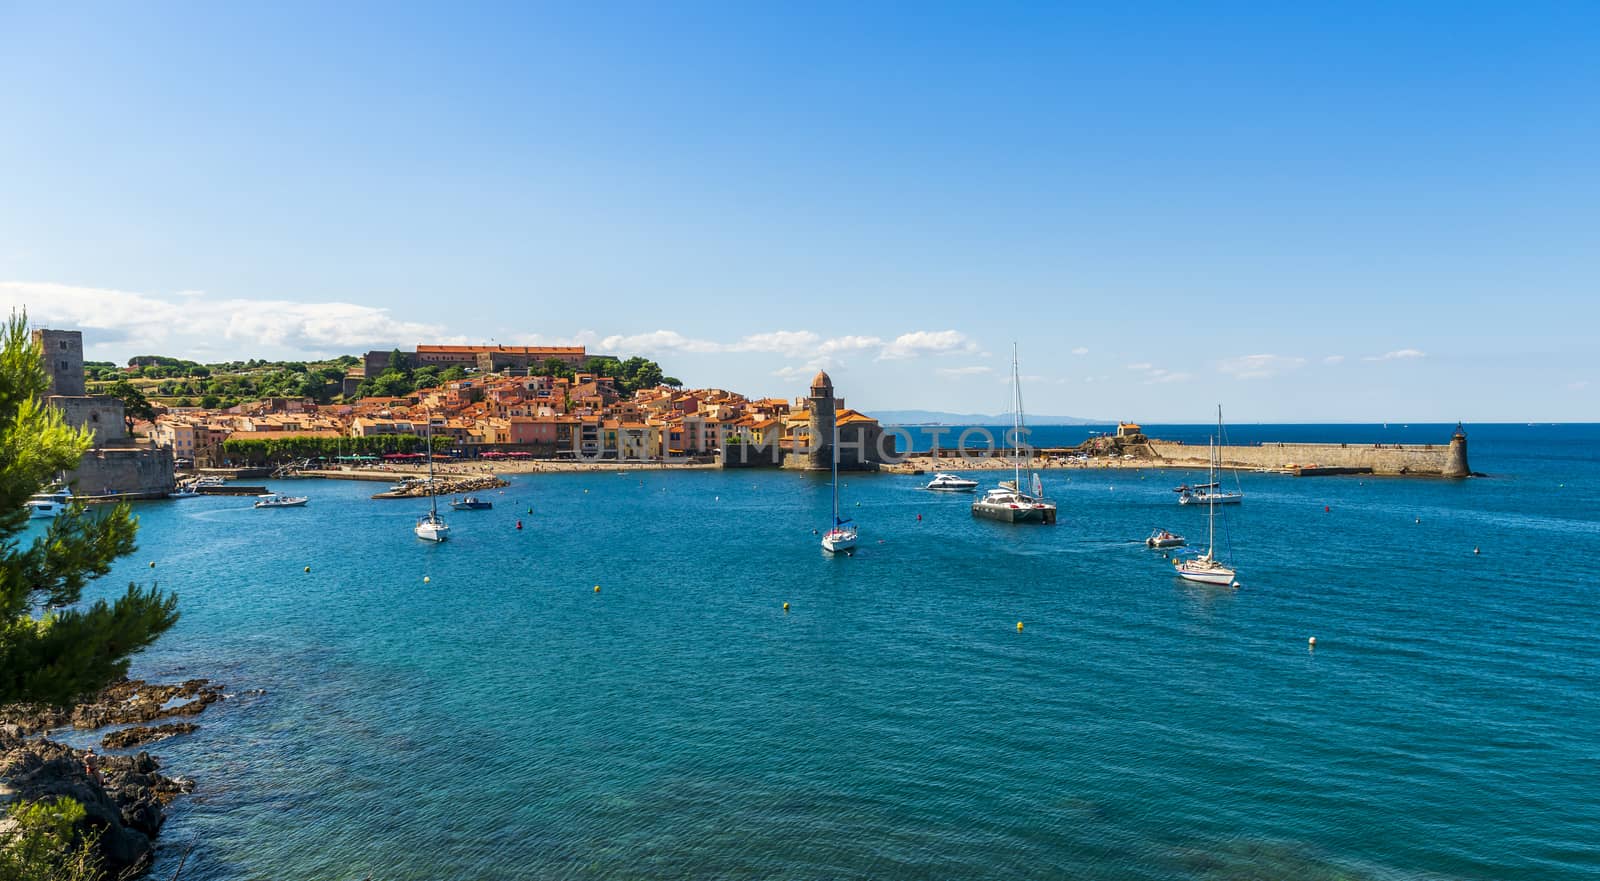 Panorama of Collioure in the south of France by Frederic